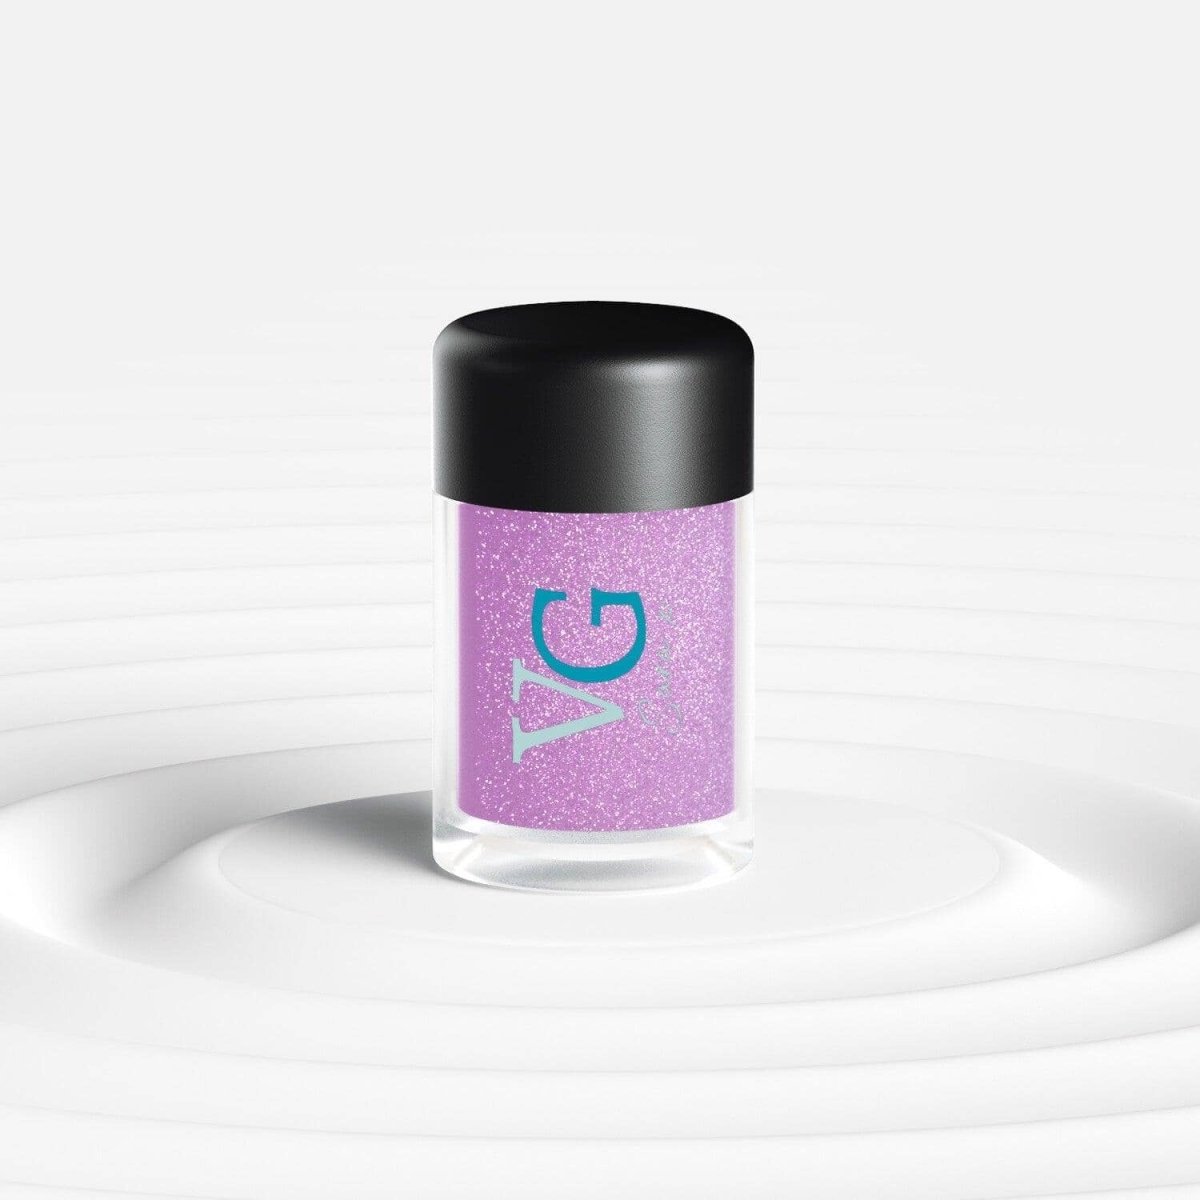 A bottle of purple Cruelty-Free Mineral Stardust Glitter featuring a 'G' on the label